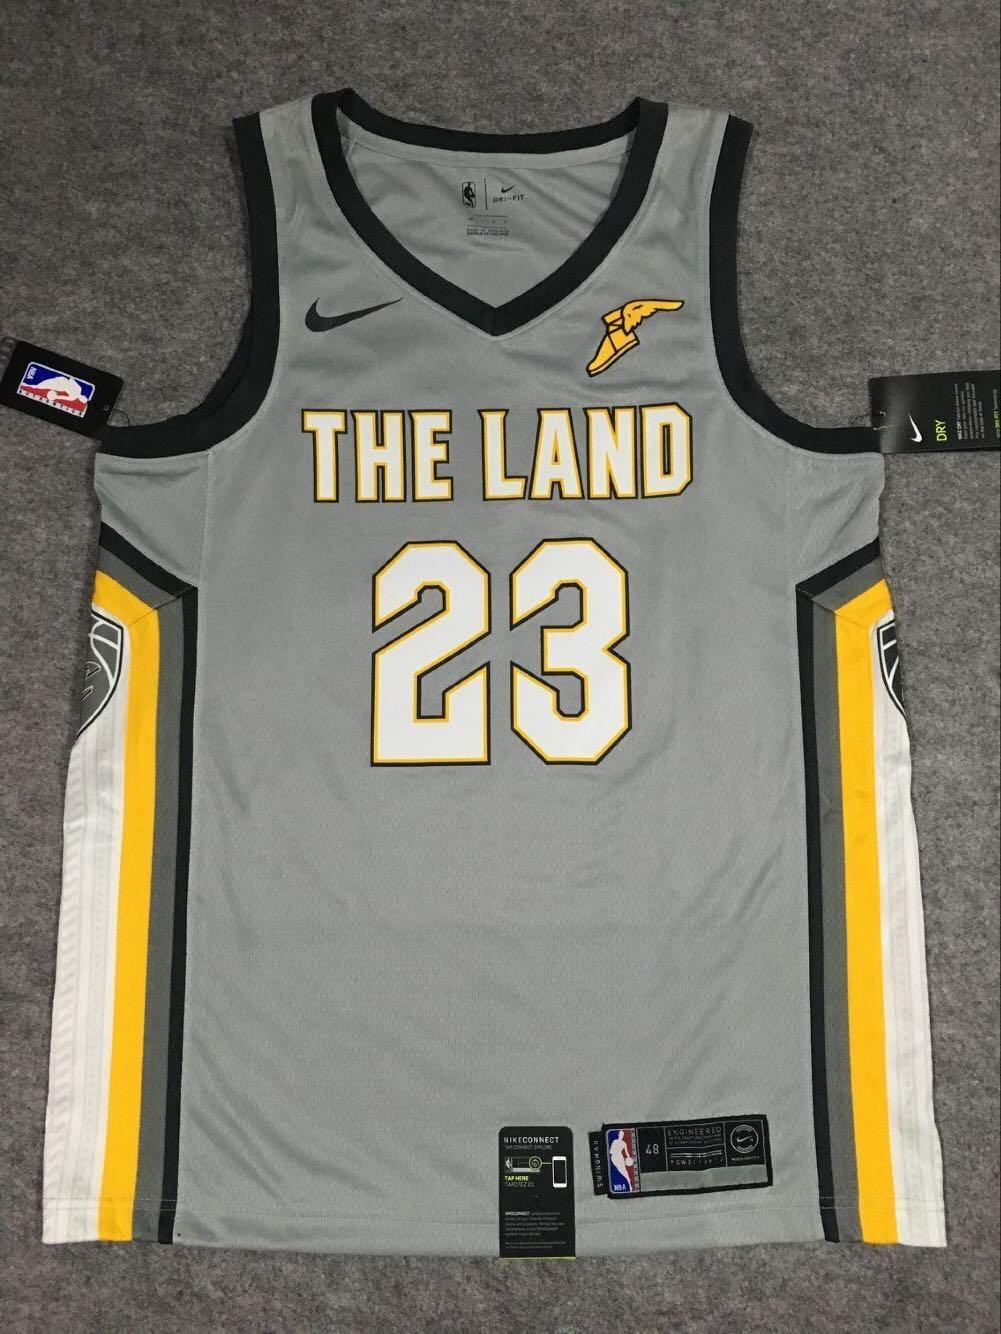 LeBron James high school basketball jersey sells for record $512K